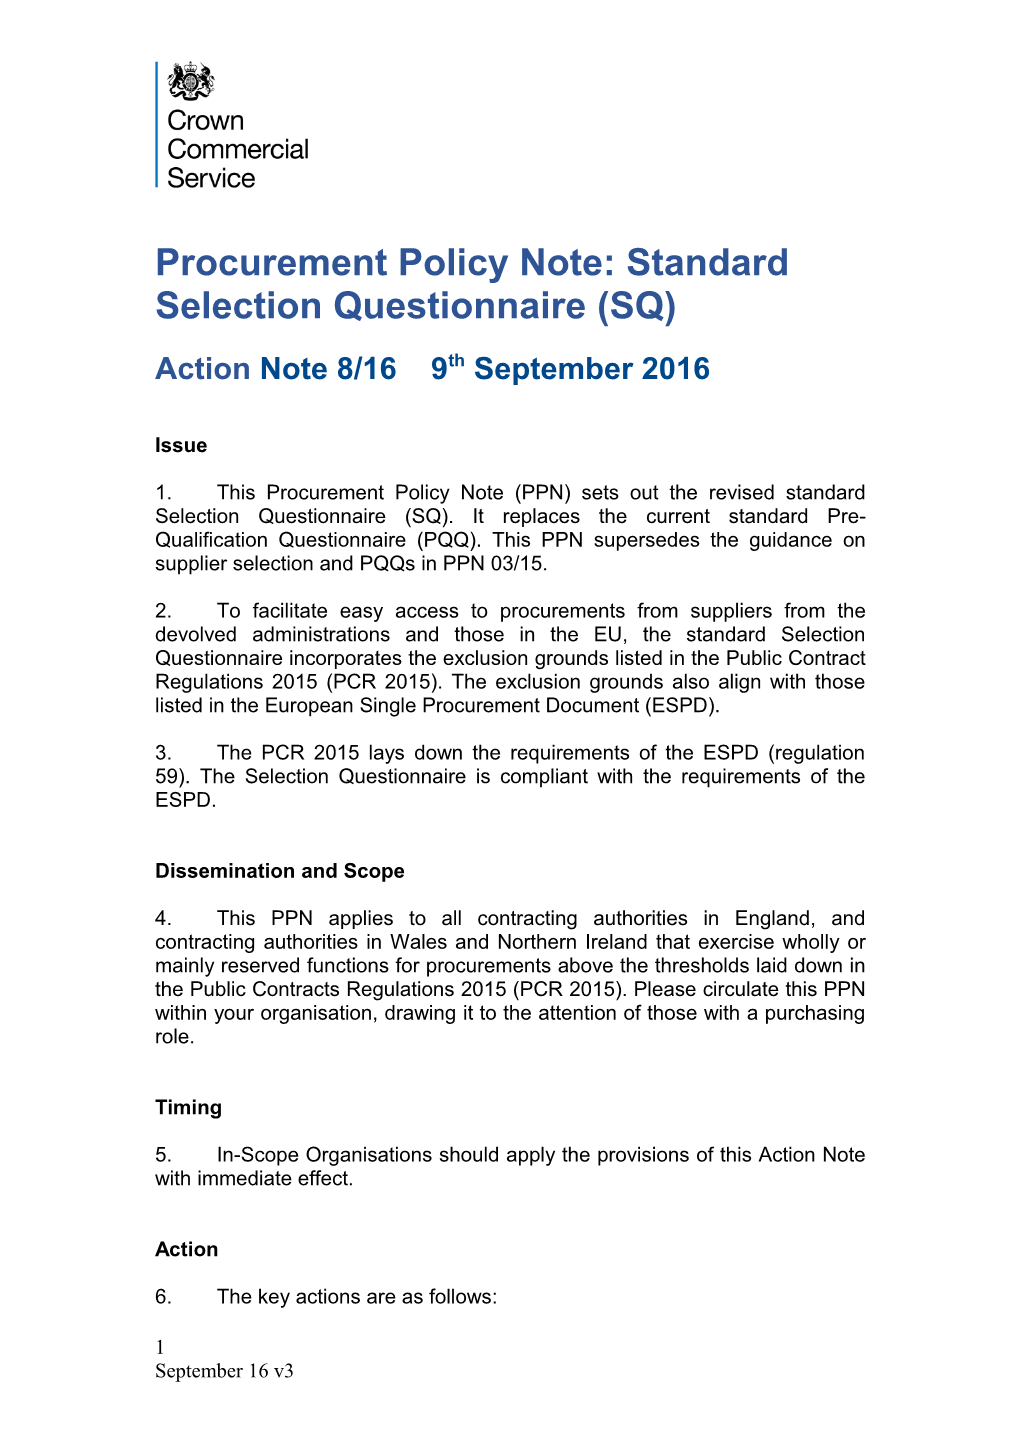 Procurement Policy Note: Standard Selection Questionnaire (SQ)